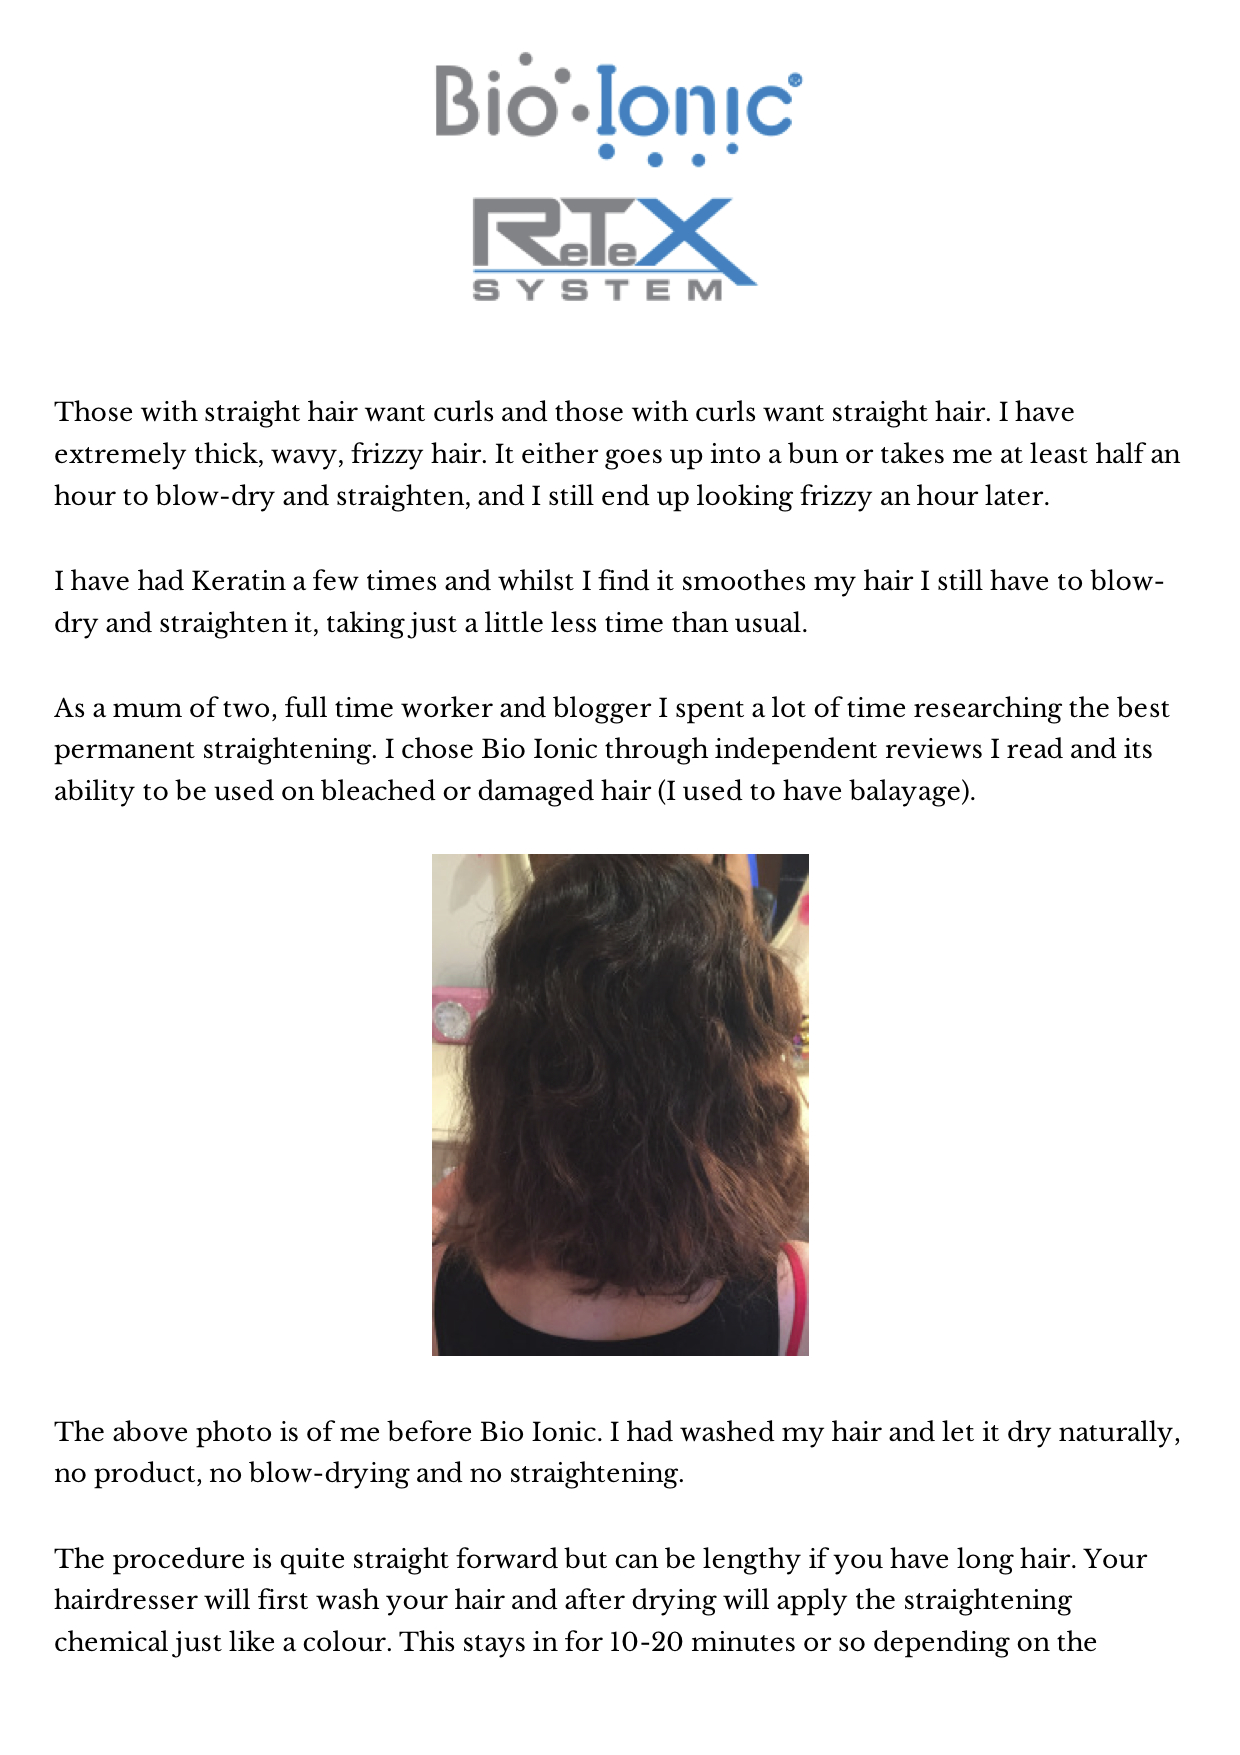 Bio Ionic Retex System Permanent Hair Straightening | The Styled Flyer a